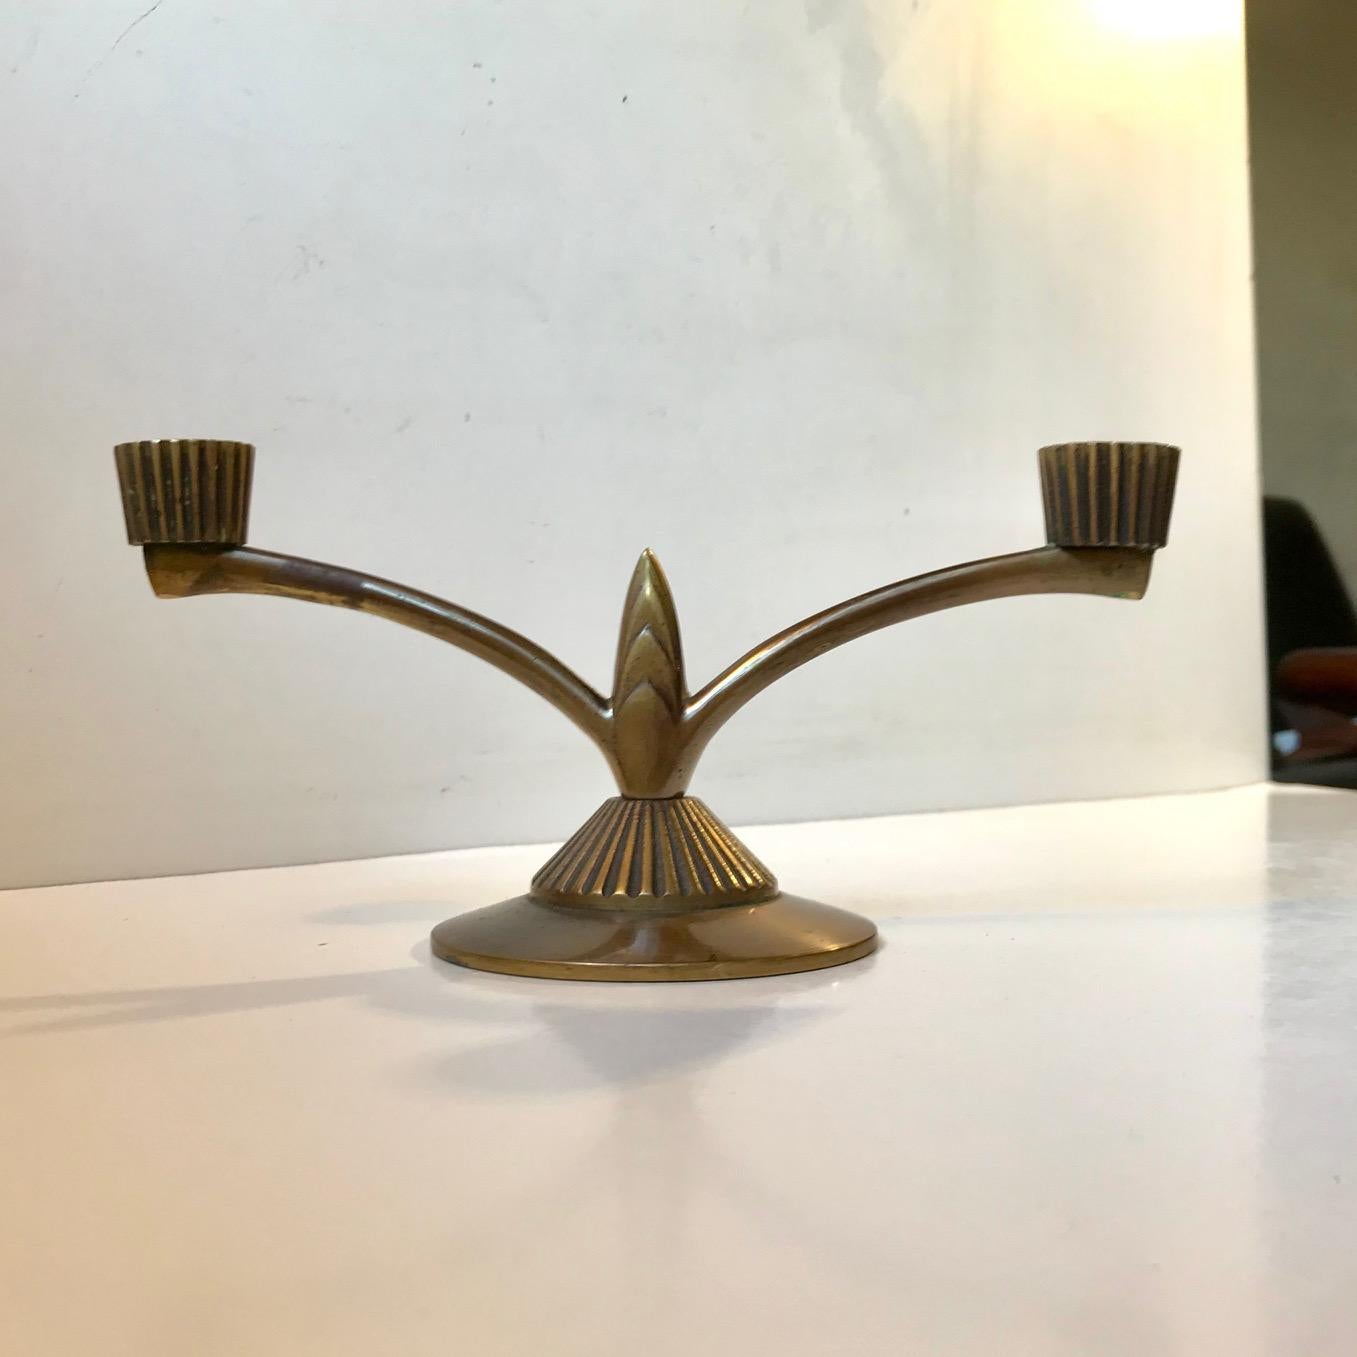 Patinated solid bronze candelabra for 2 regular sized candles. It was designed and manufactured by Tinos in Denmark during the later part of the 1930s. Its features architectural details and distinct Art Deco styling. Measurements: W: 23 cm, H: 11